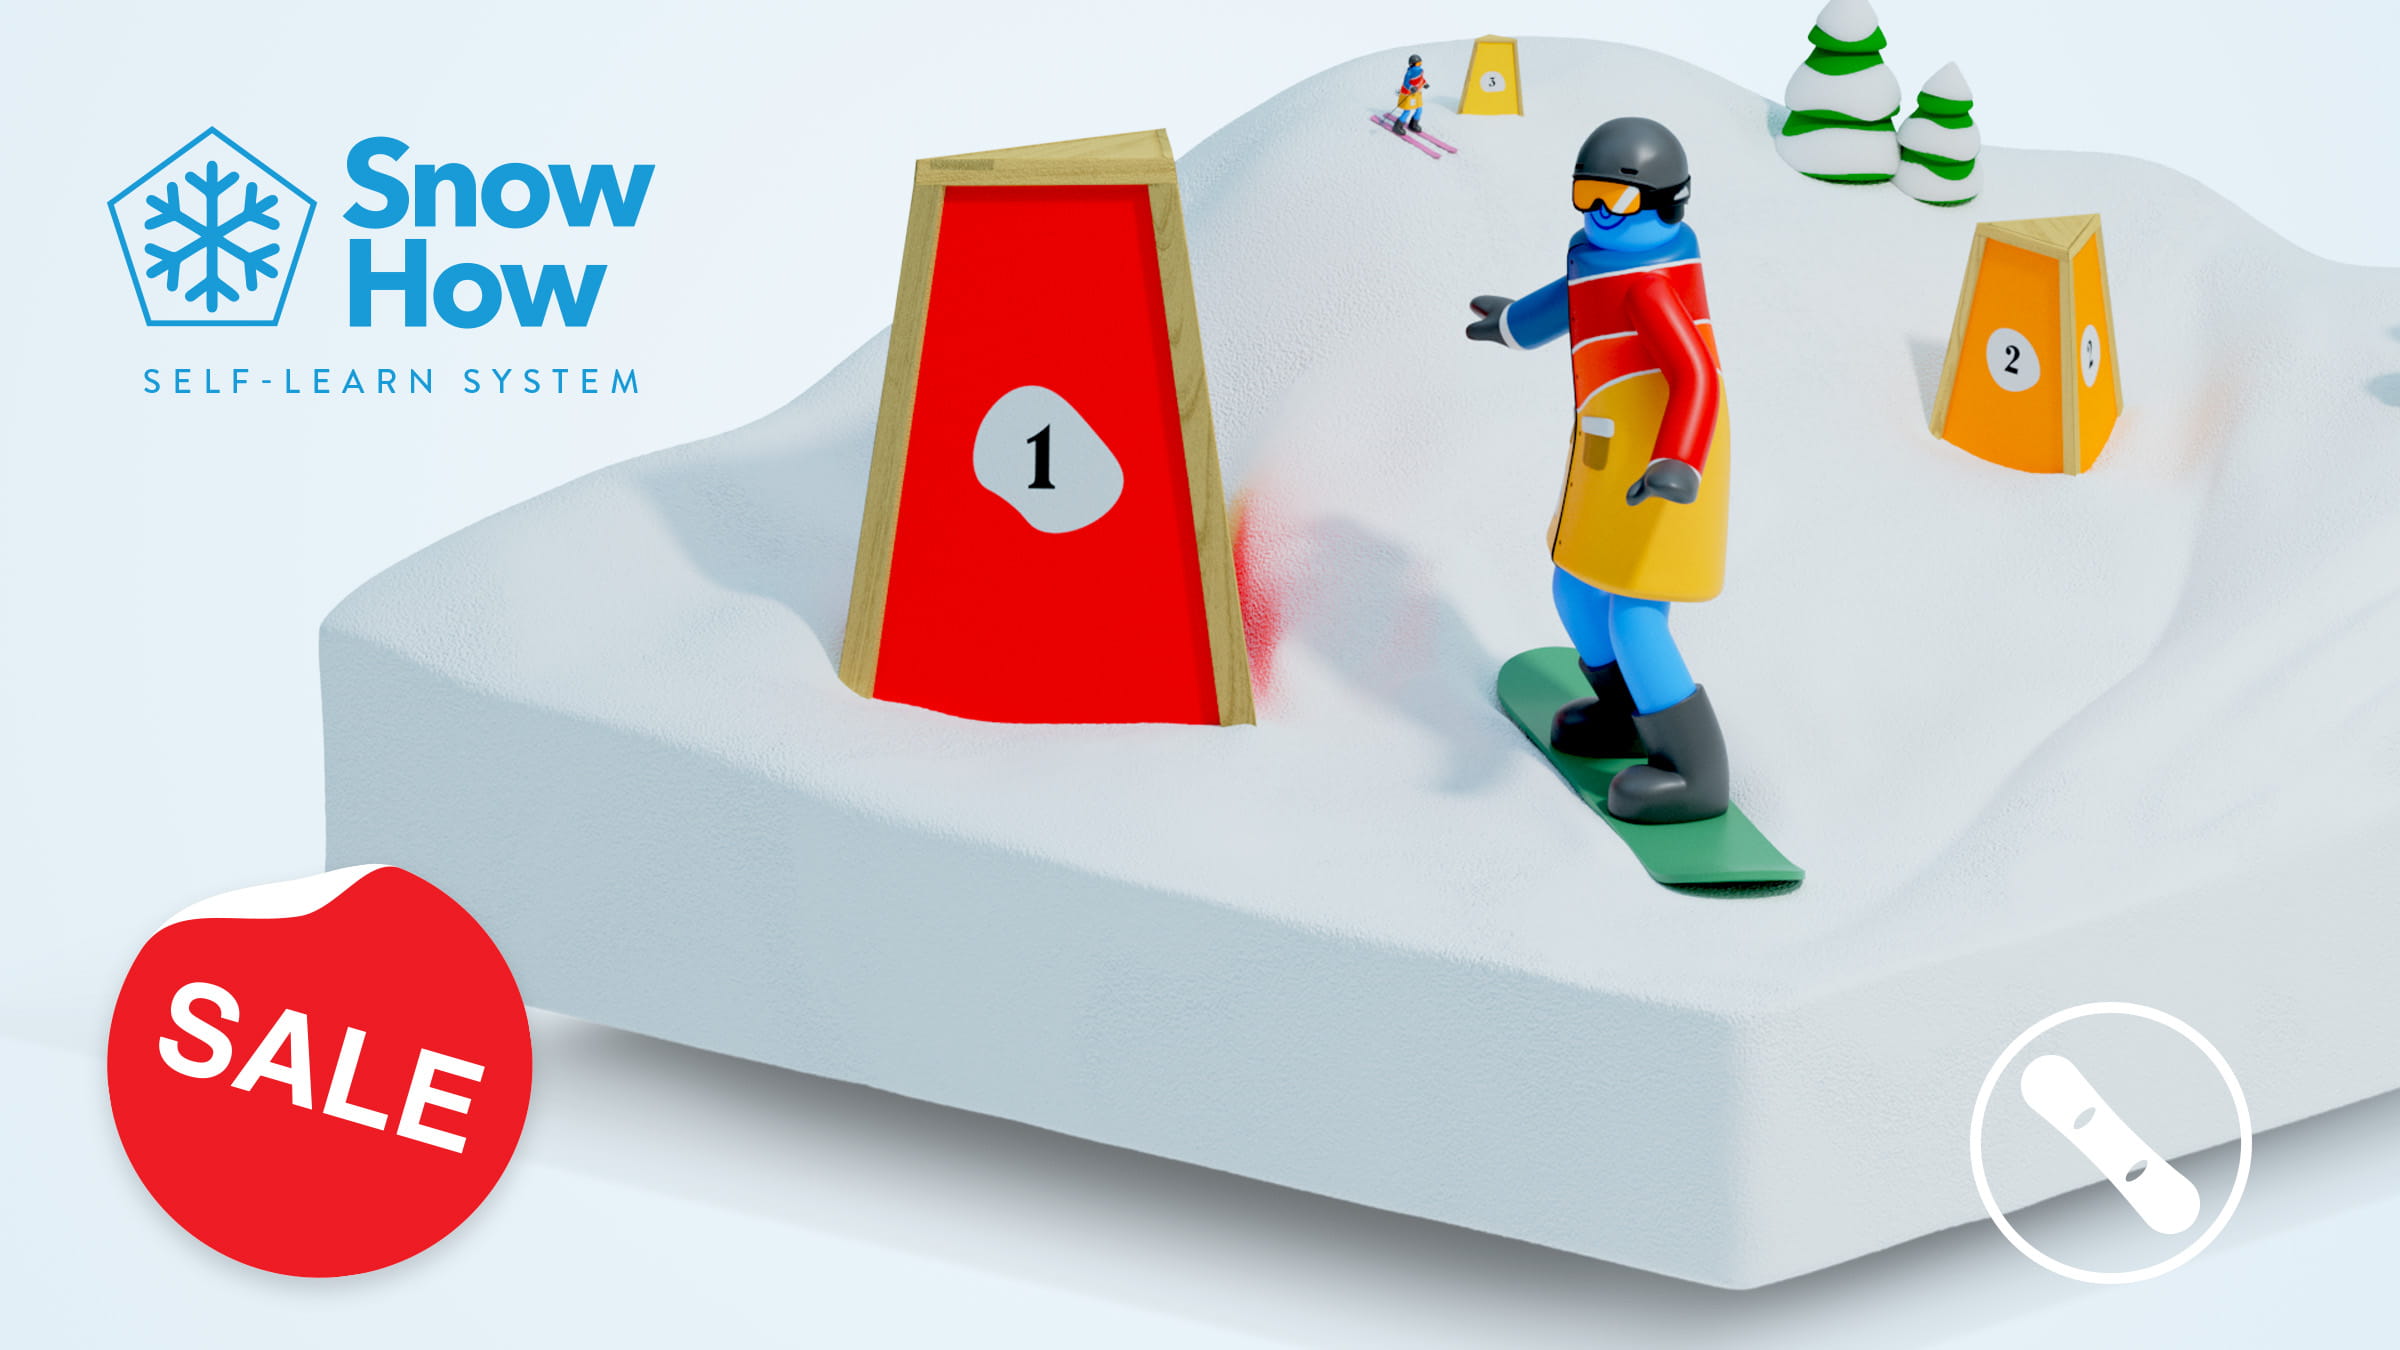 Snow How Snowboard Sale 50% OFF